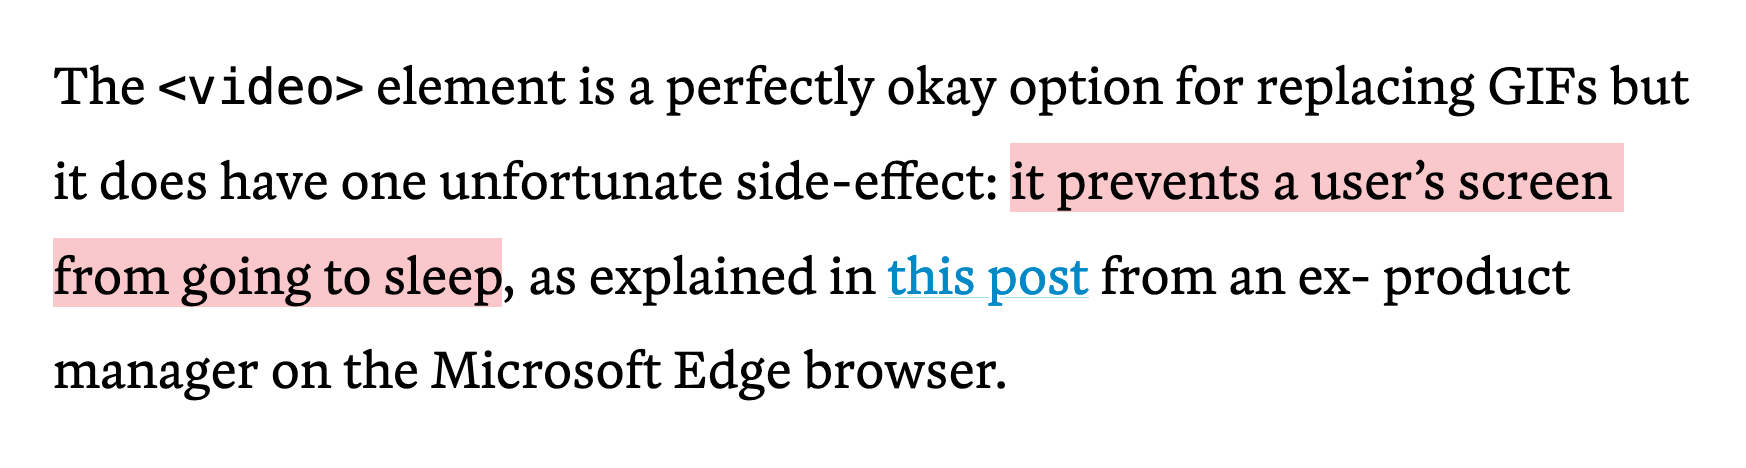 The 'video' element is a perfectly okay option for replacing GIFs but it does have one unfortunate side-effect: it prevents a user’s screen from going to sleep, as explained in this post from an ex- product manager on the Microsoft Edge browser.